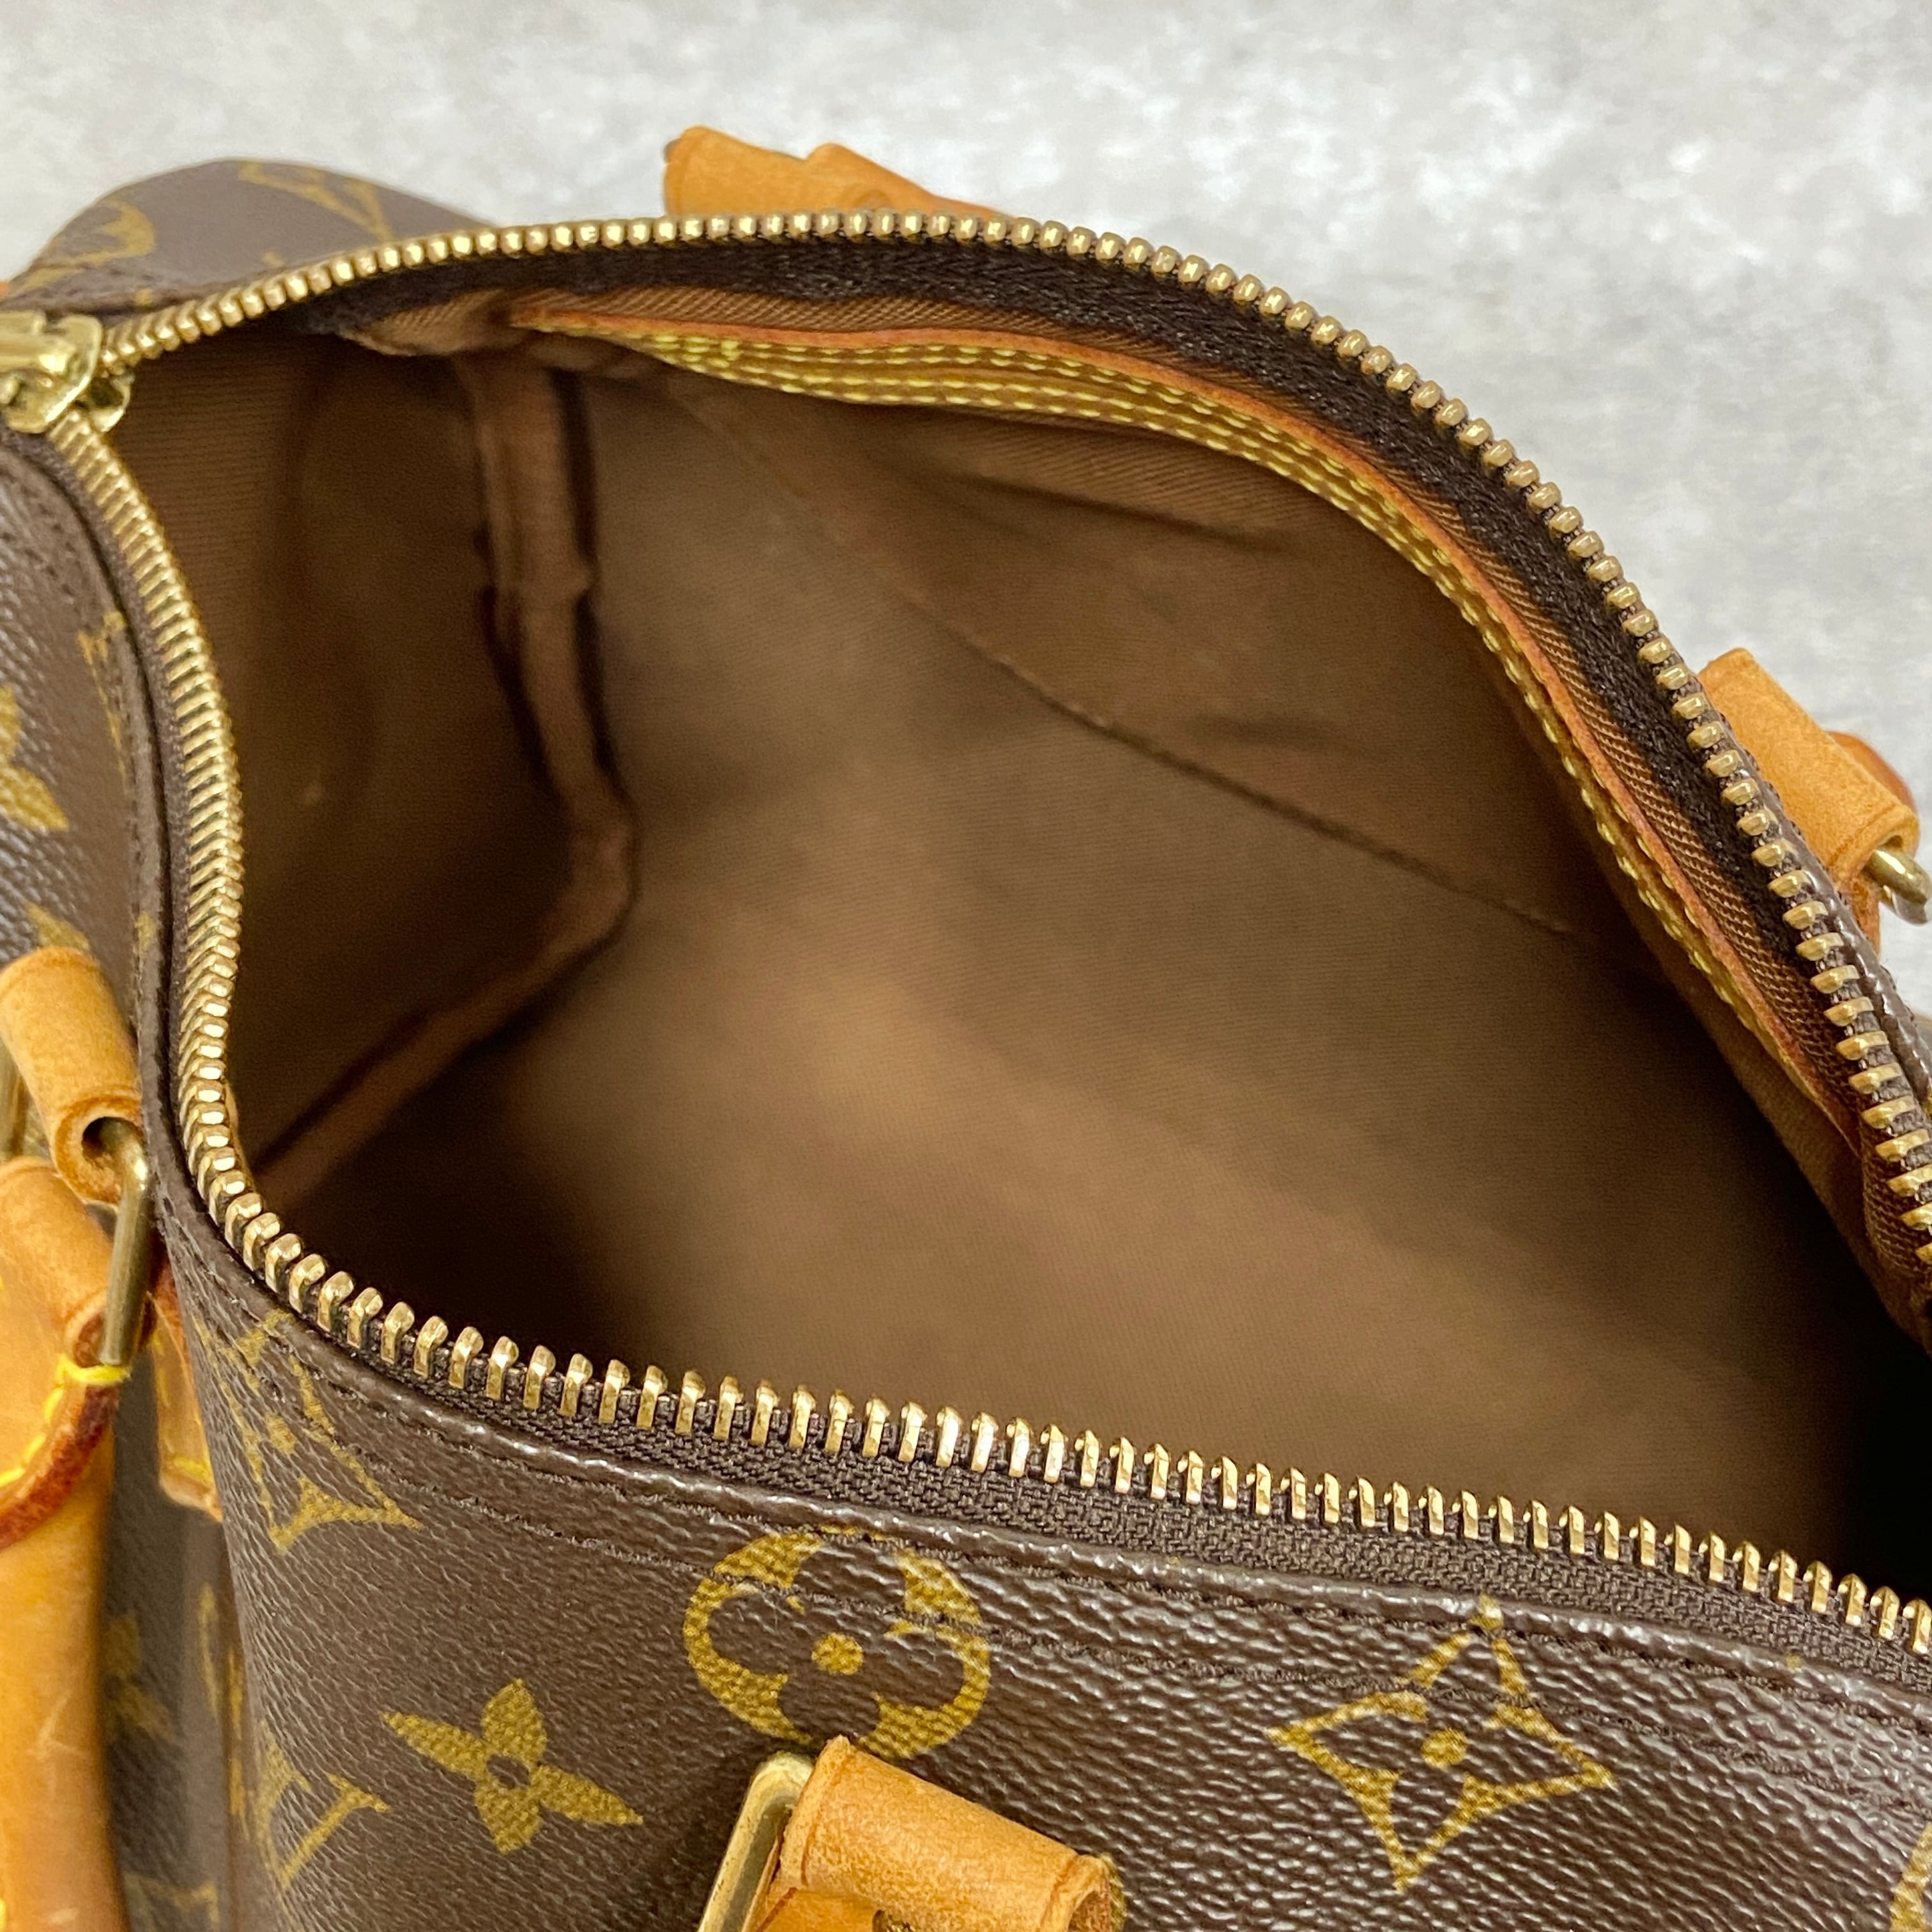 Reserved items※LOUIS VUITTON ルイ・ヴィトン モノグラム スピーディ 